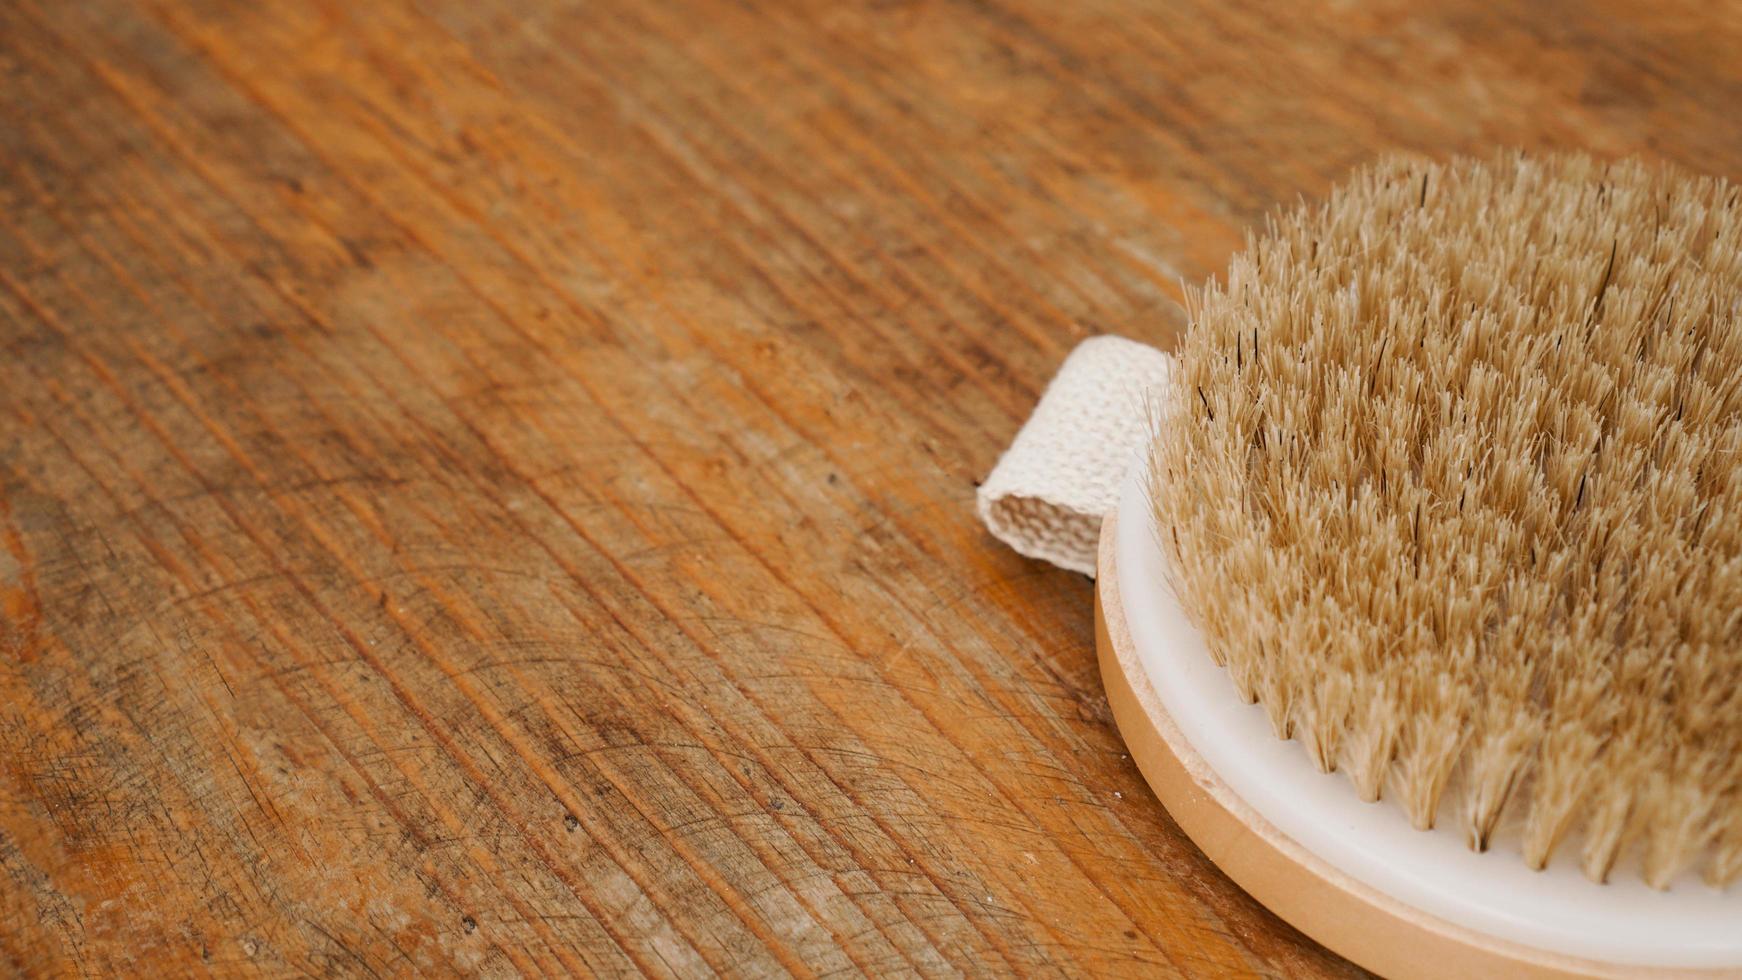 Dry massage brush made of natural materials on a wooden background photo